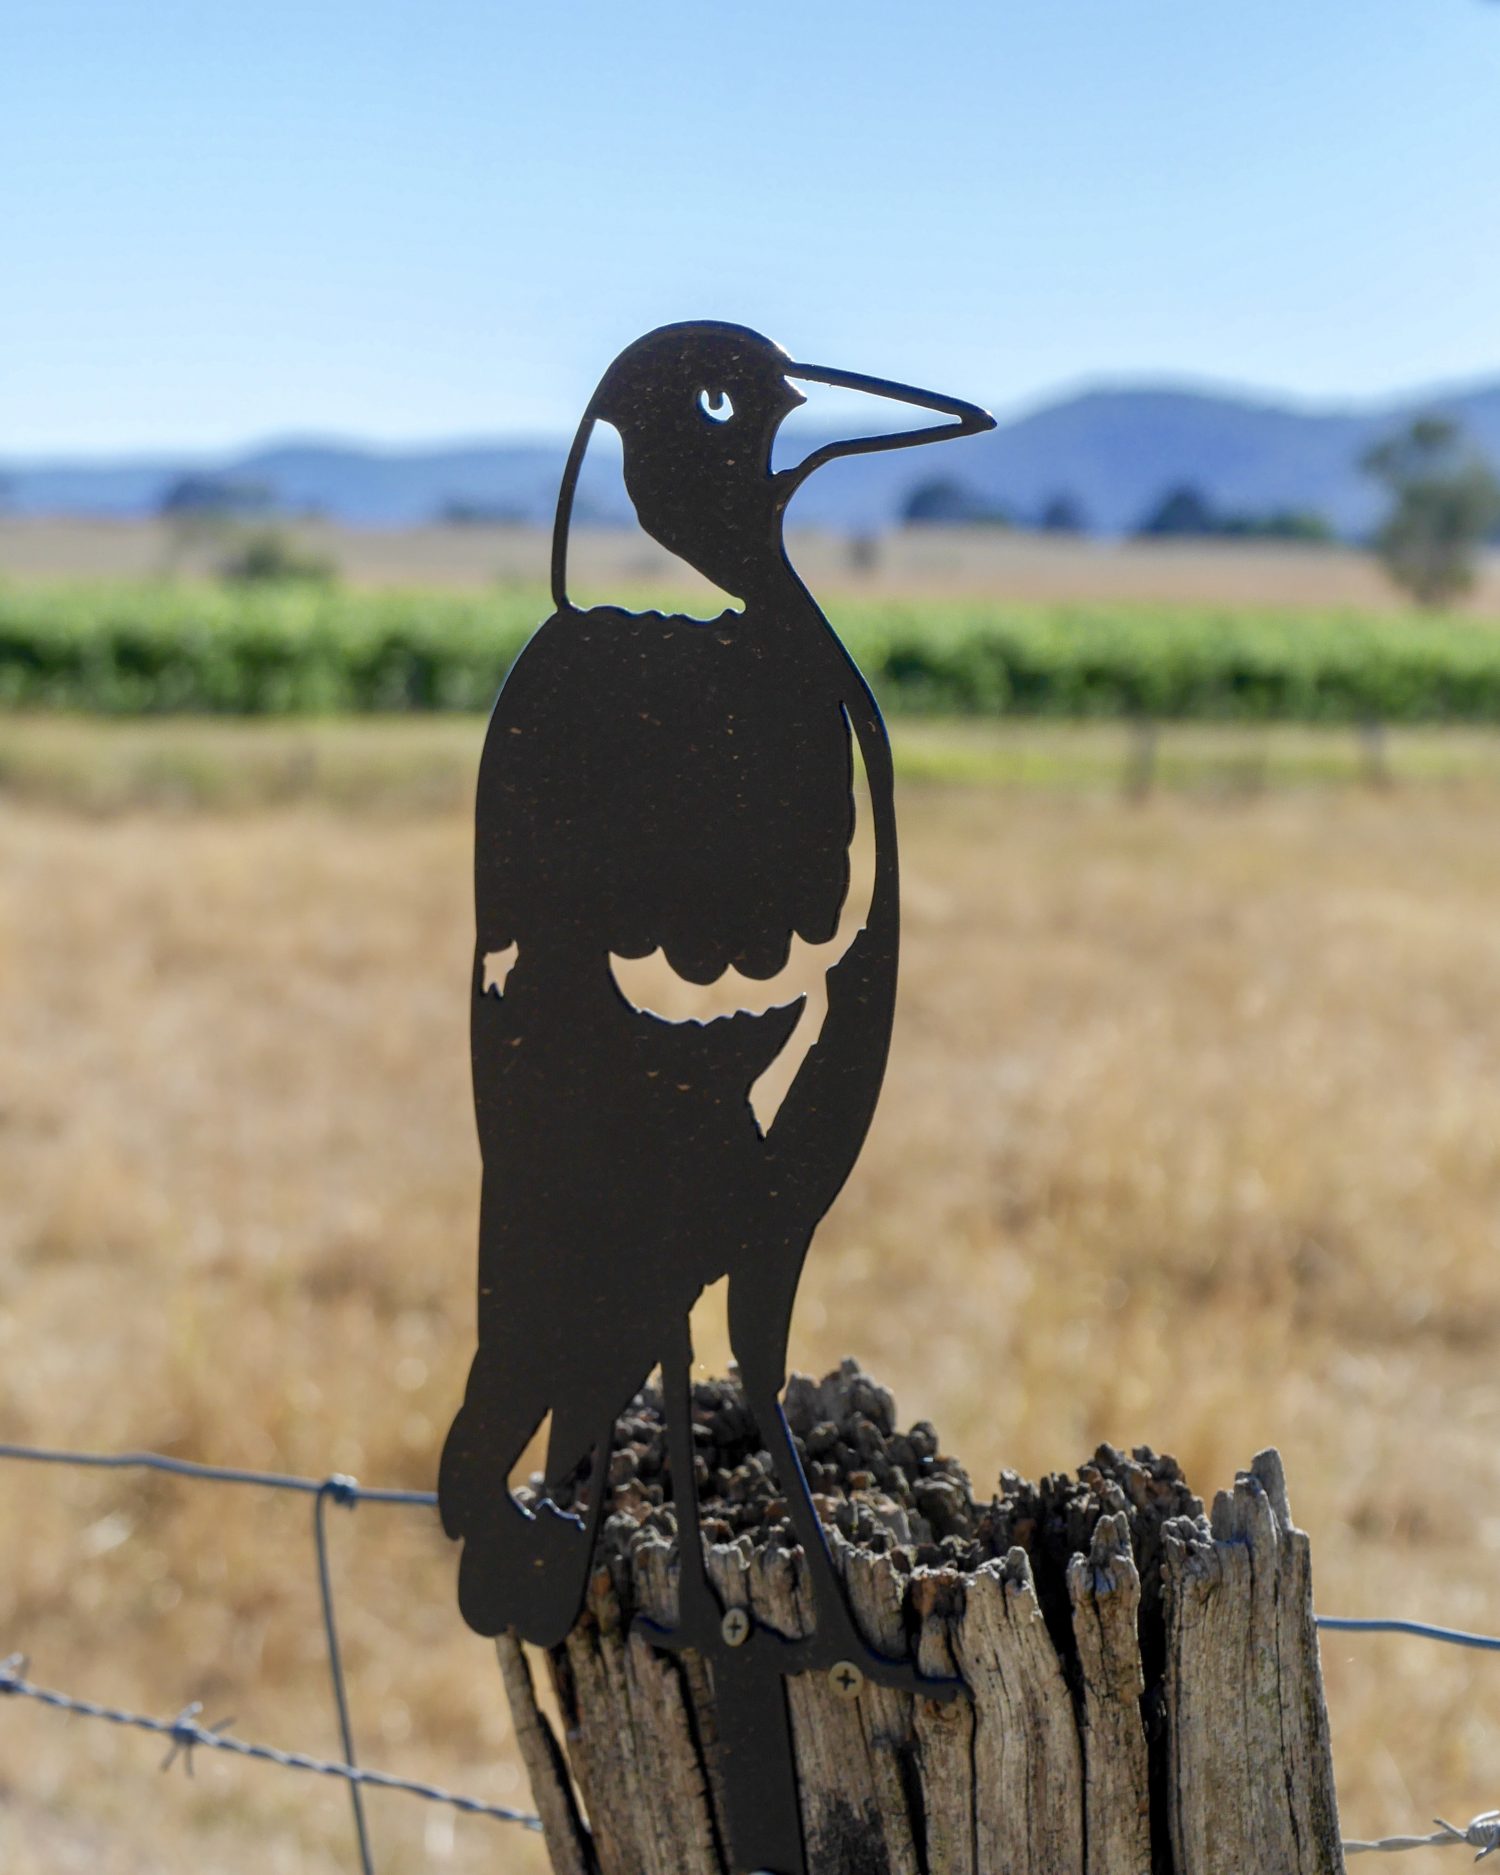 Magpie sitting on the fence